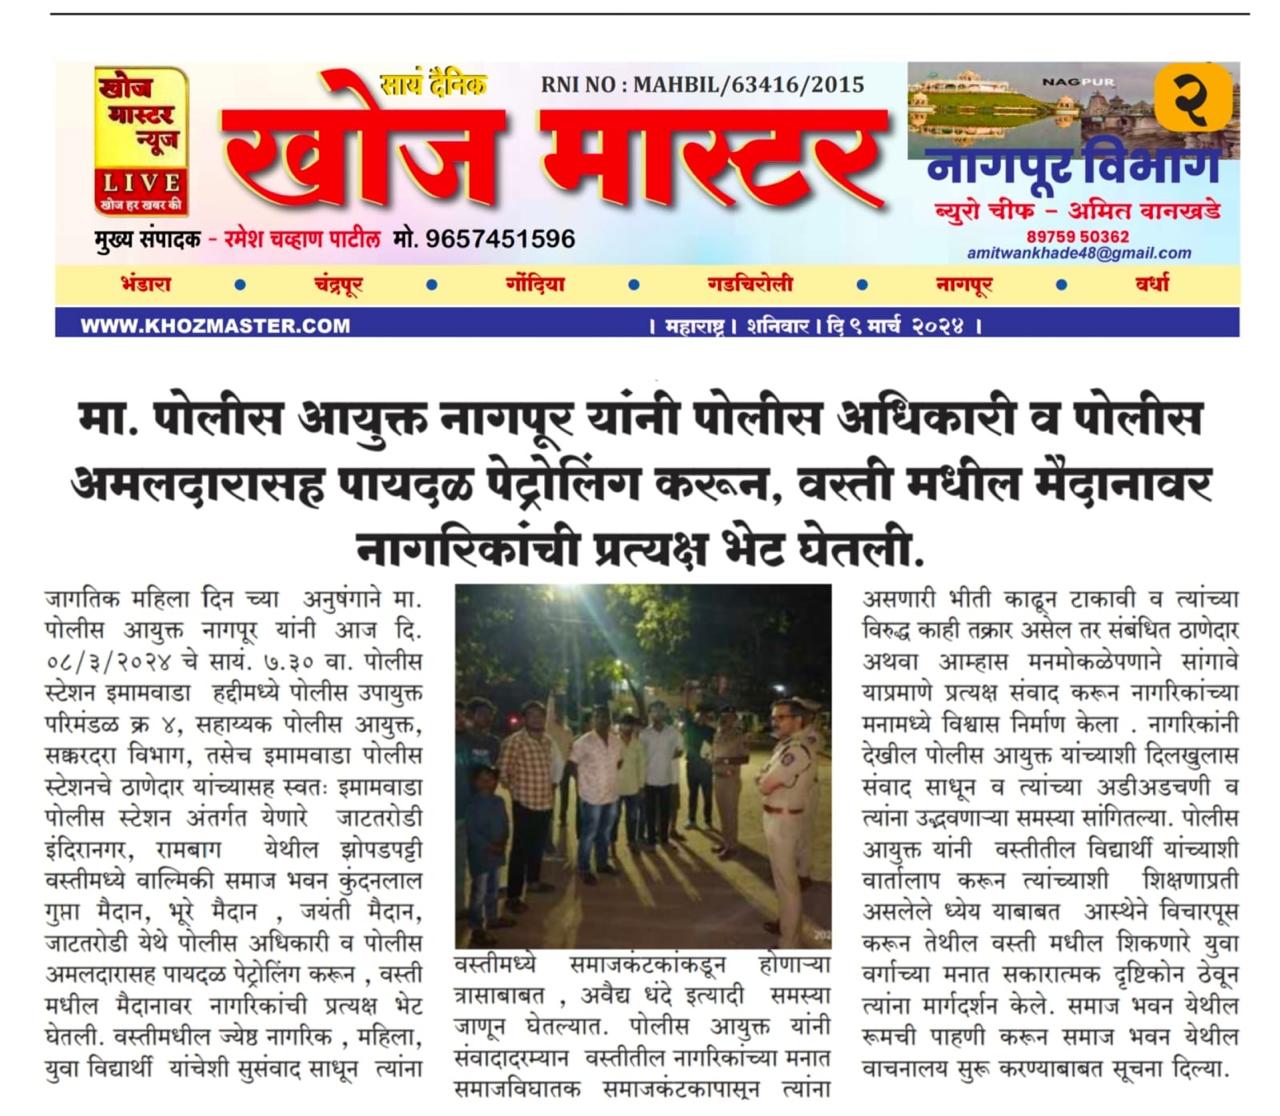 Police Commissioner Nagpur along with police officer and police met the citizens on foot - Dr. Ravinder Singal